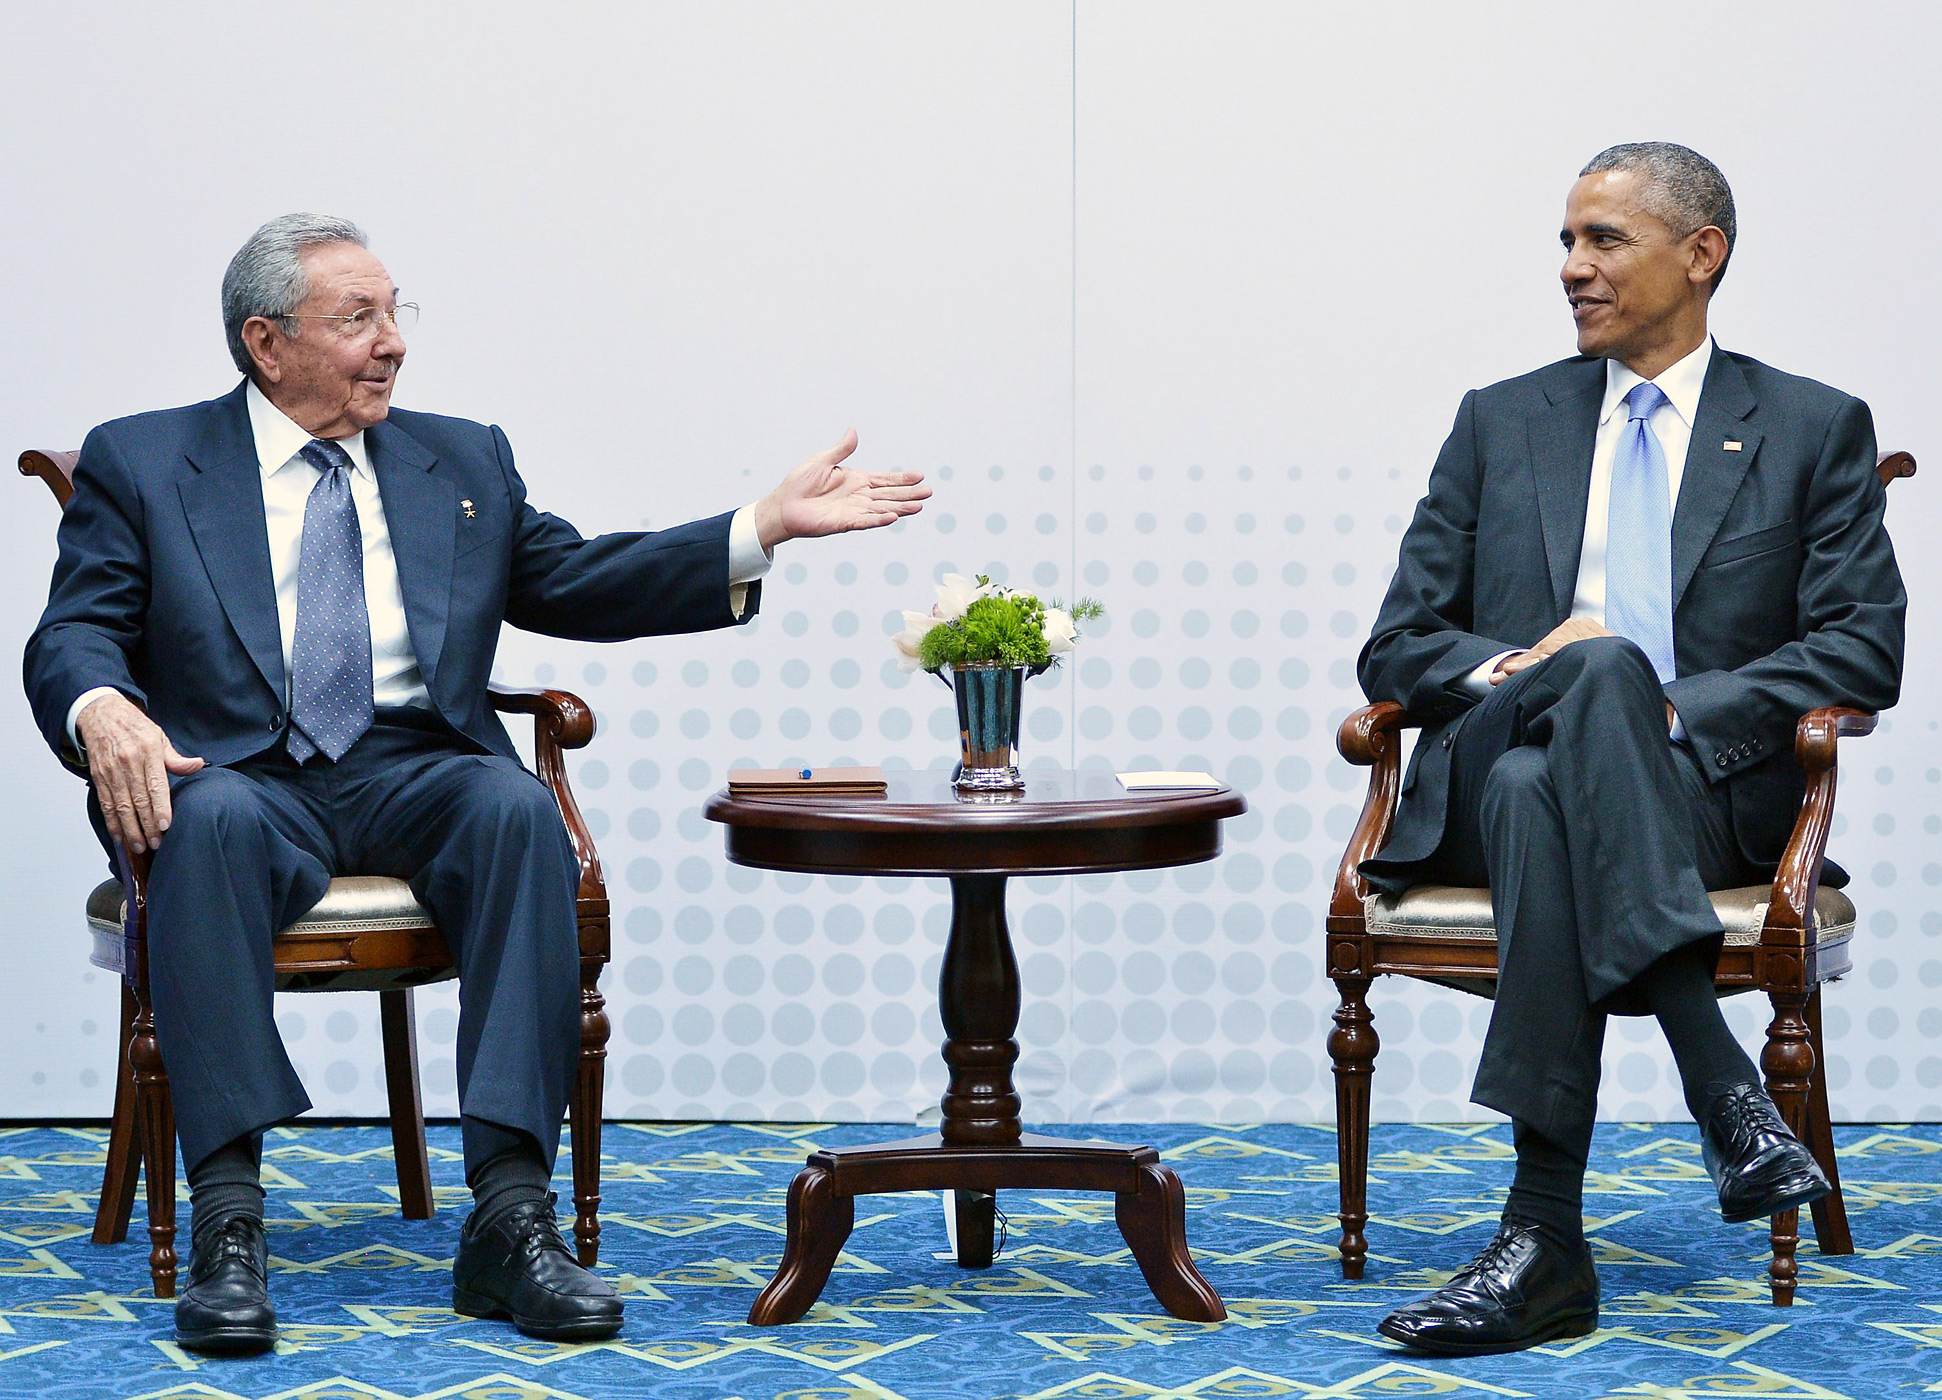 Cuba's President Raul Castro, left, speaks during a meeting with President Barack Obama on the sidelines of the Summit of the Americas at the ATLAPA Convention center on April 11, 2015 in Panama City, Panama. (Mandel Ngan—AFP/Getty Images)